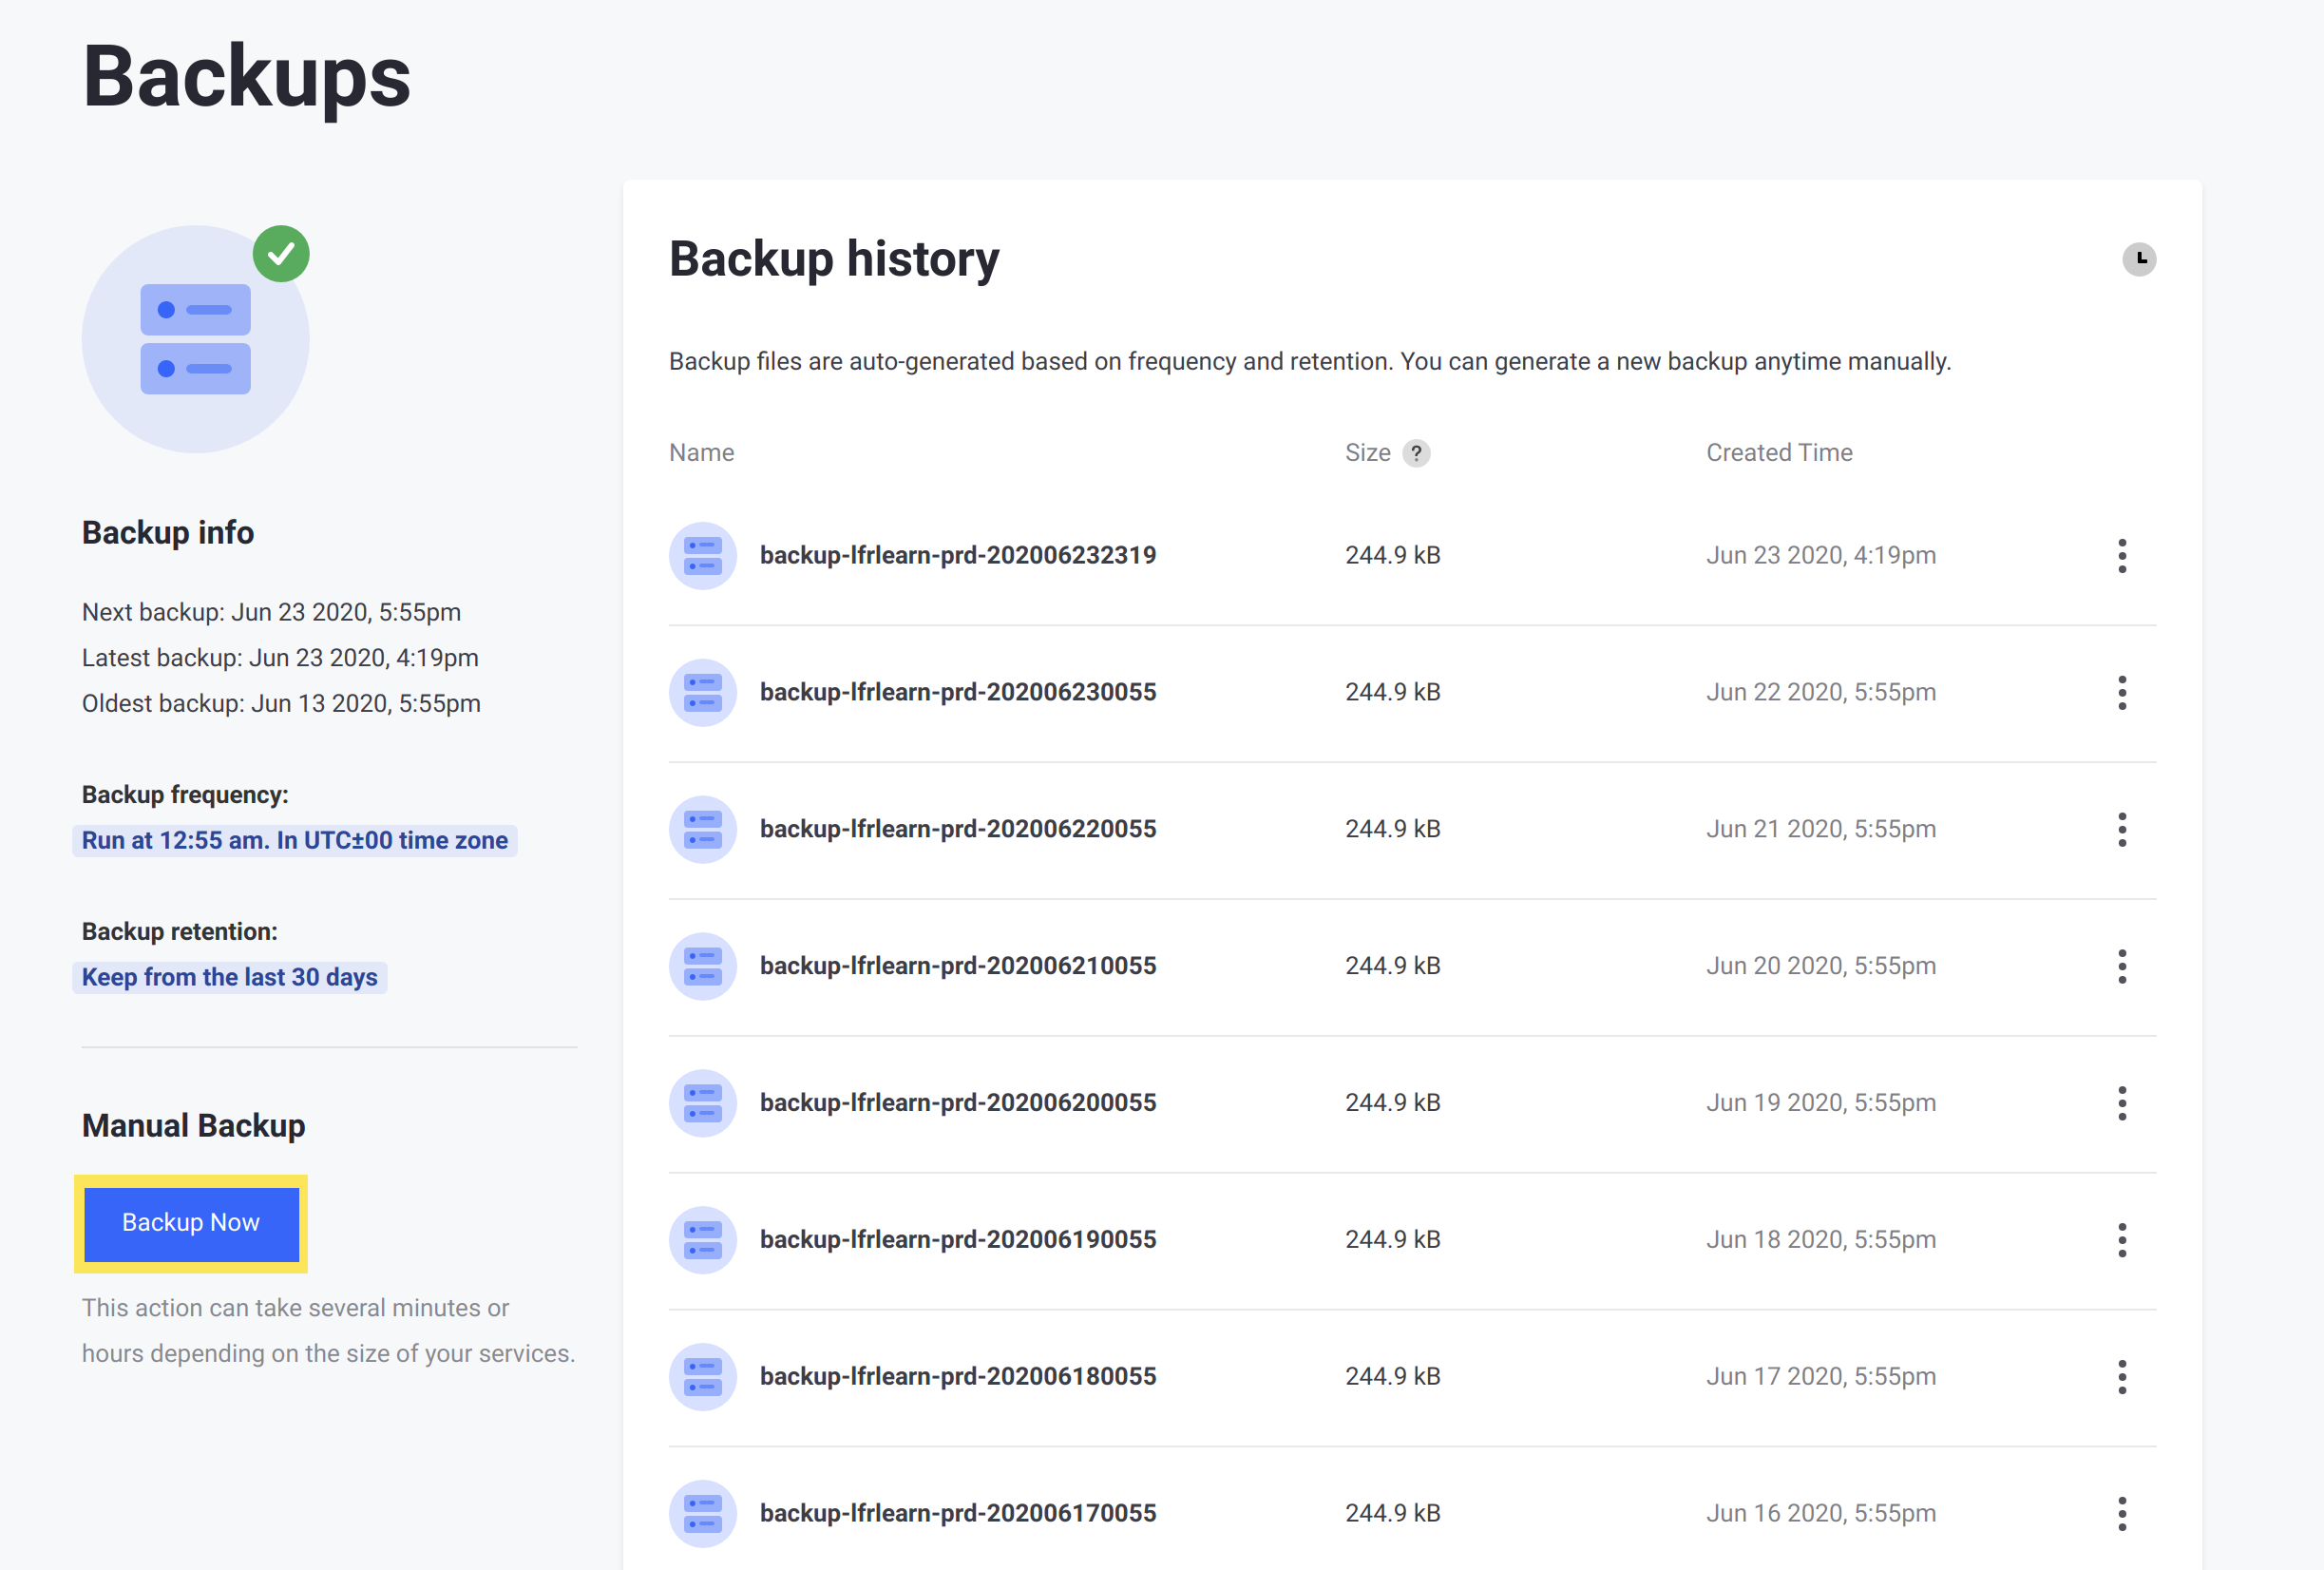 Click Backup Now to create a new backup.